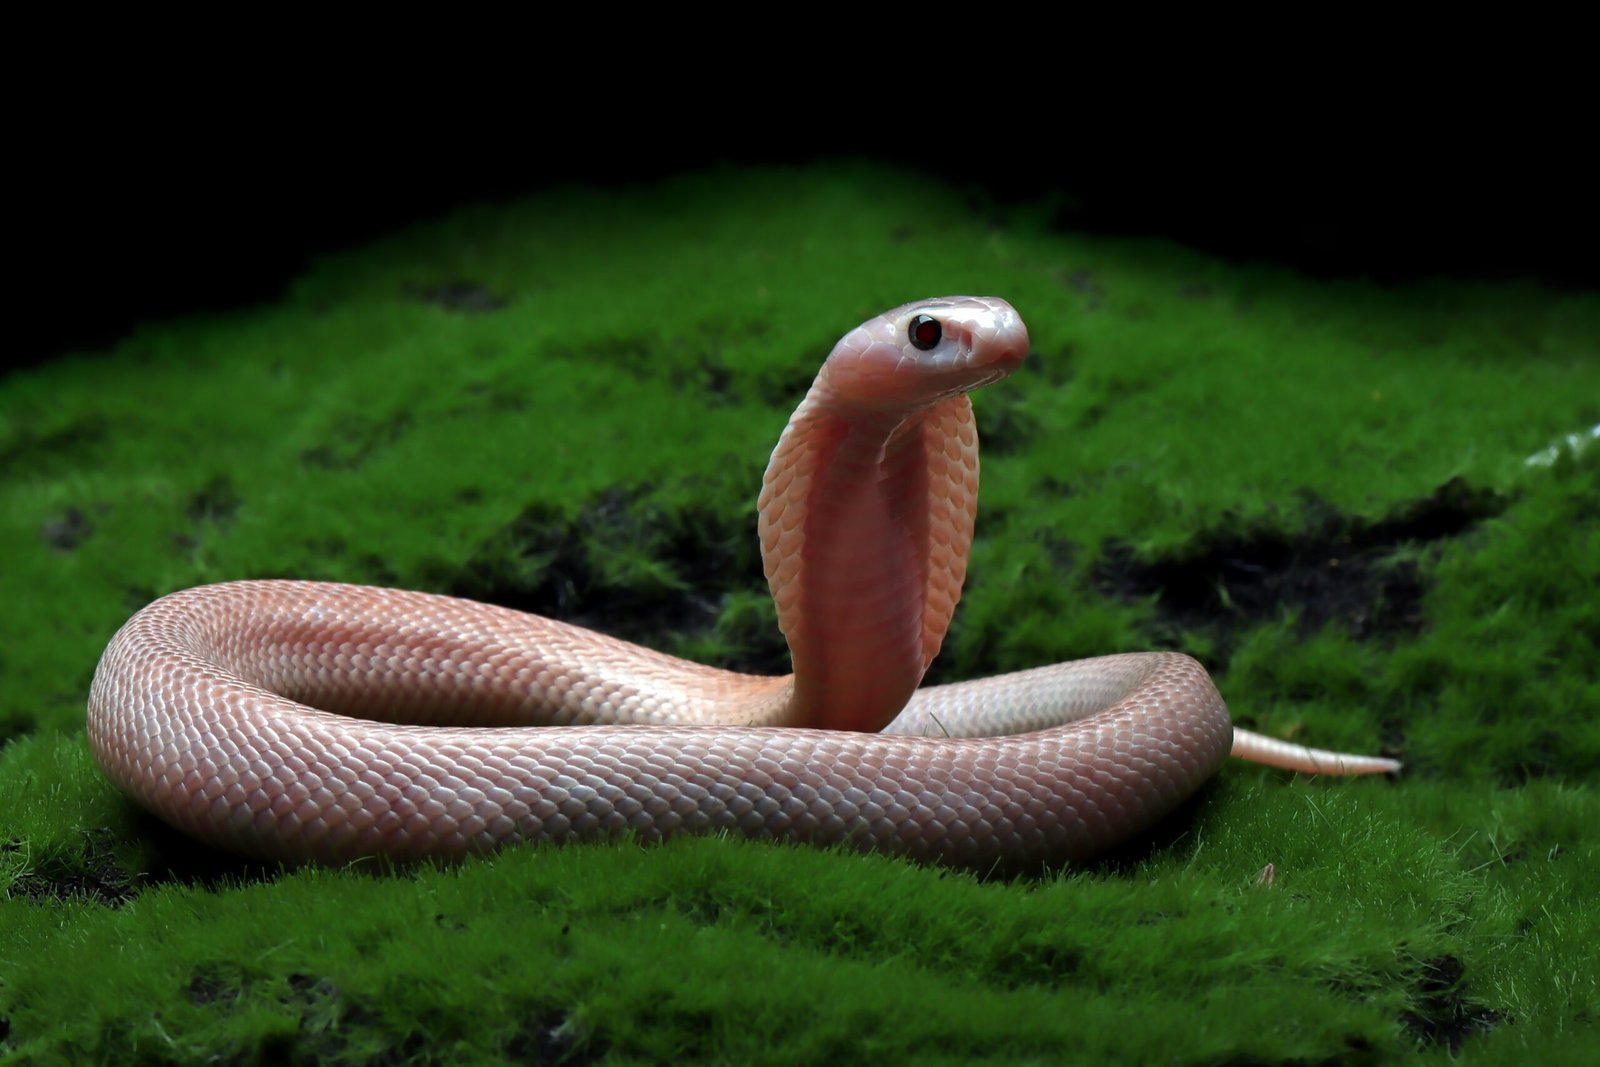 Albino snake breeds. Are very unique, and many people love their albino snake because of their color.